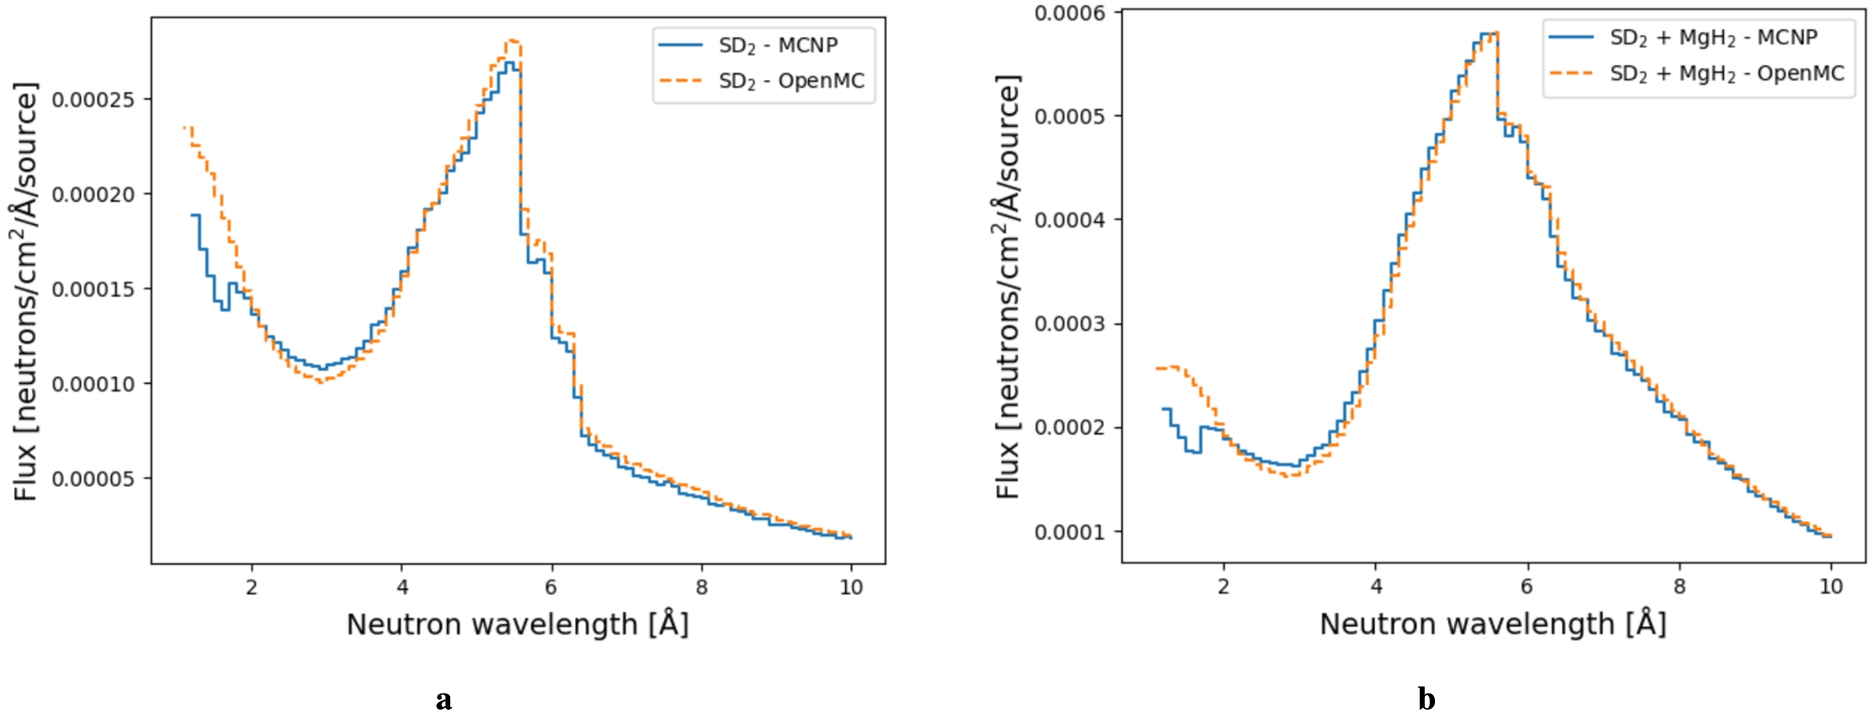 Comparison of the neutron wavelength spectra for the spherical moderator filled with SD2 calculated in MCNP and OpenMC. (A) spectra without the MgH2 reflector at 20 K. (B) spectra with the MgH2 reflector at 20 K.